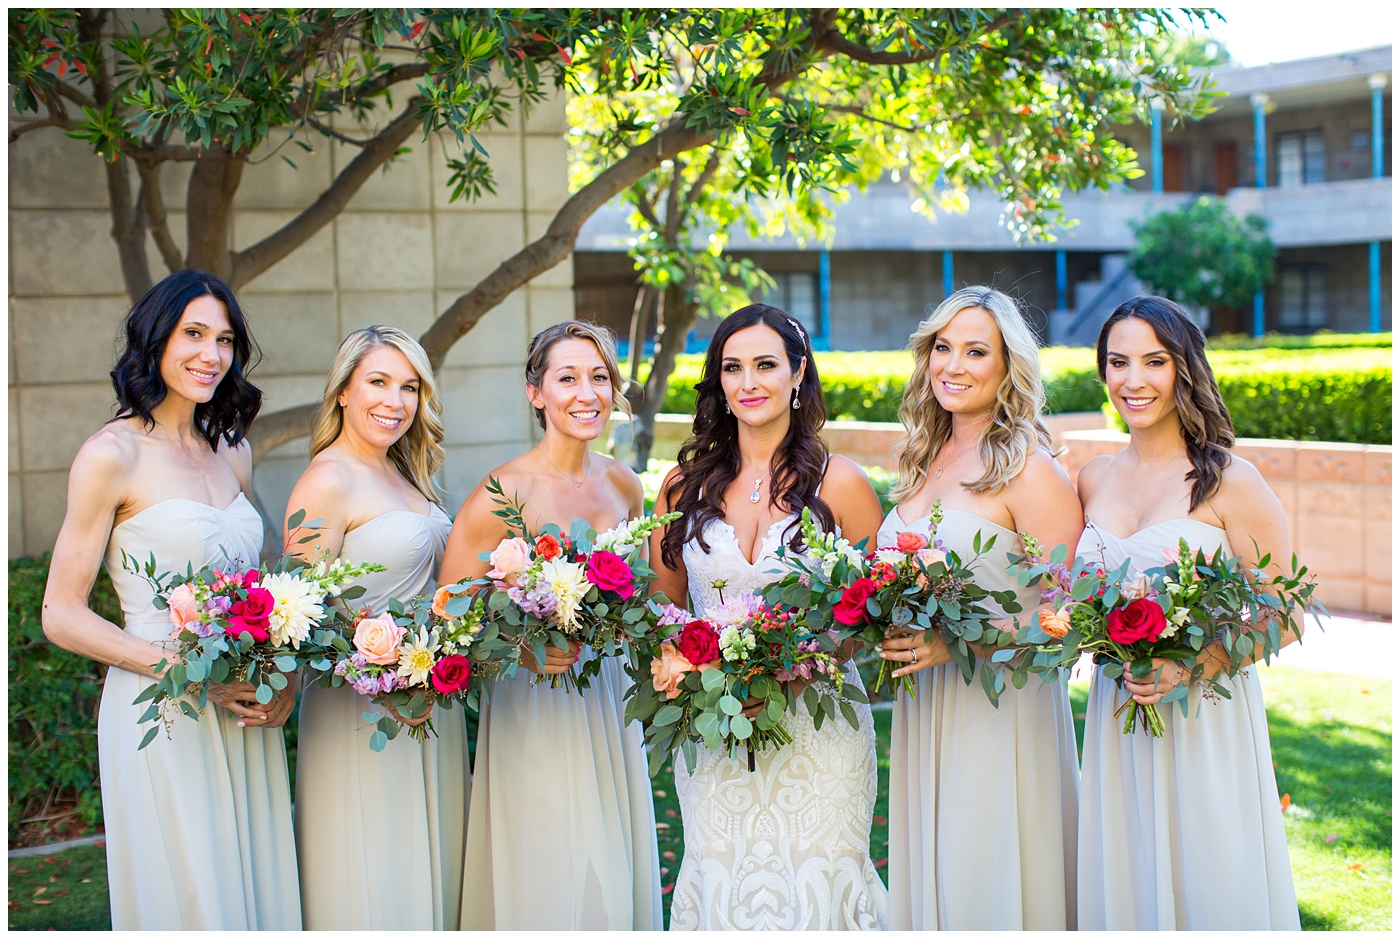 brunette bride in wedding dress with thin straps with bright color roses, dahlia, snap dragons loose bouquet with bridesmaids in champagne long dresses wedding day bridal party portrait 